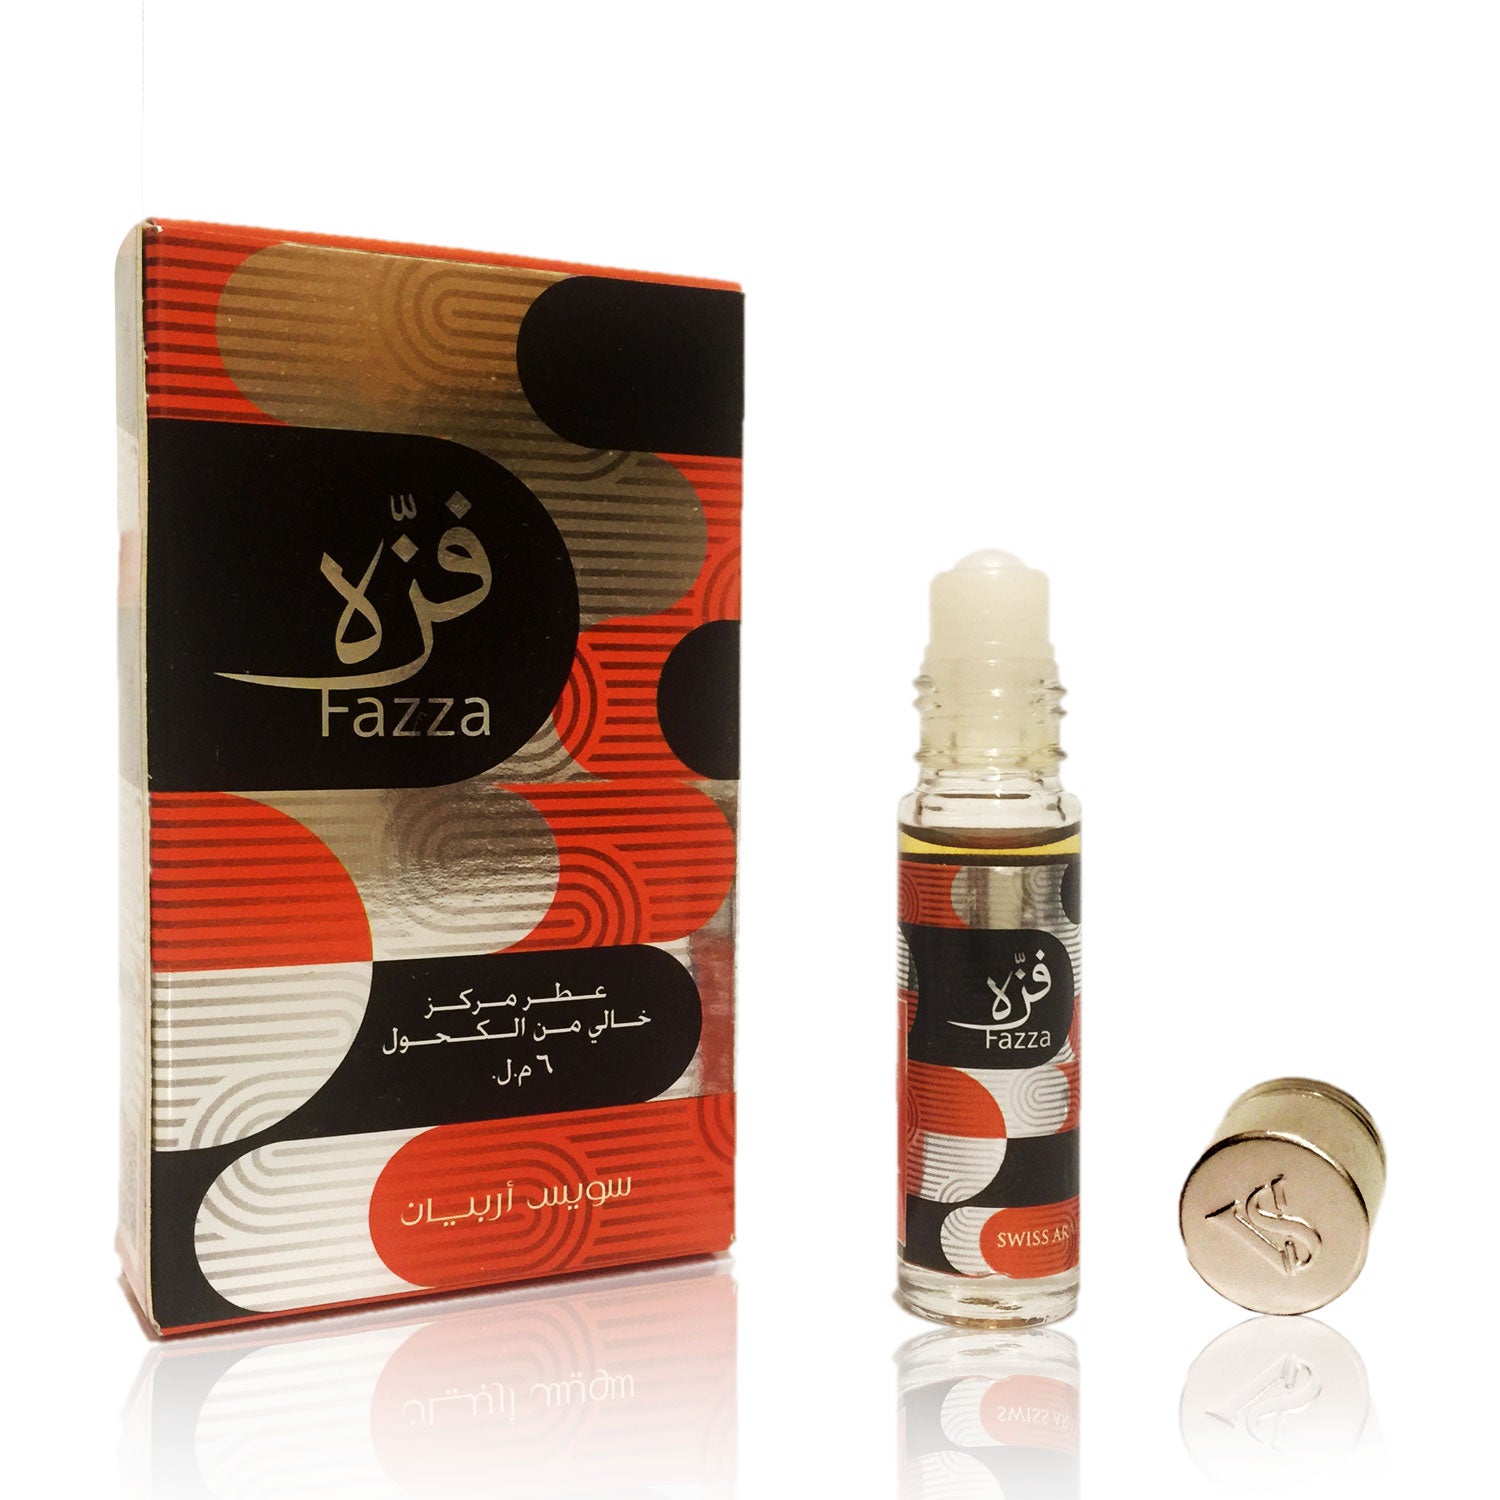 FAZZA, Roll On Perfume Oil 6 mL (.2 oz) | Floral, Woody and Spicy